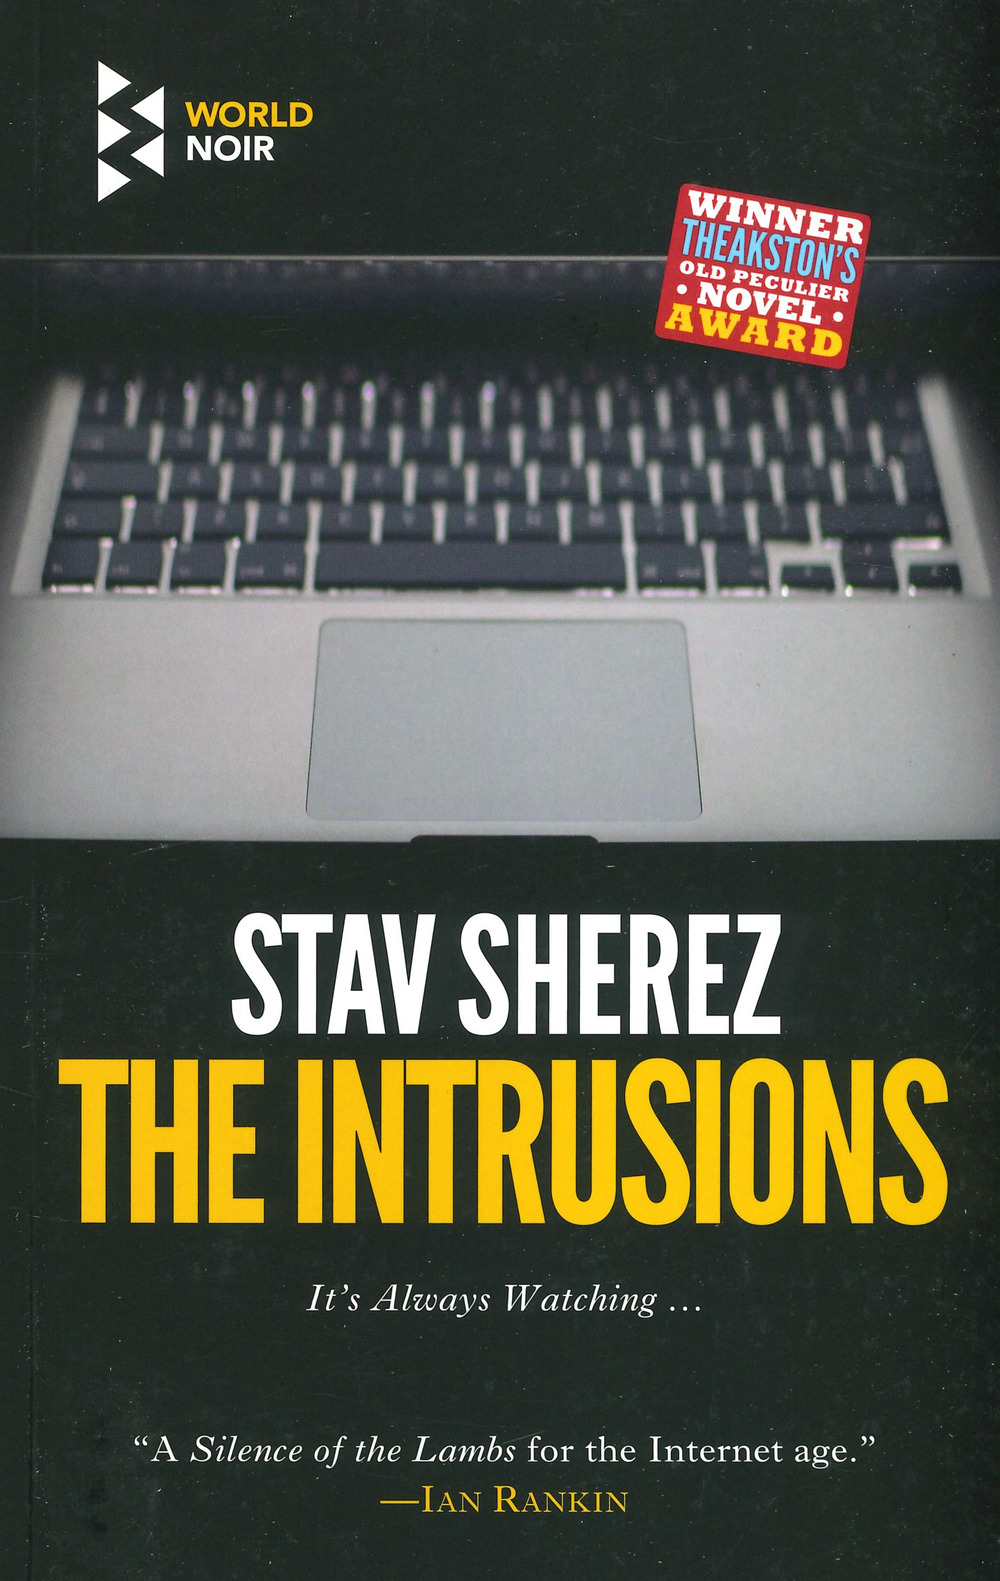 The intrusions